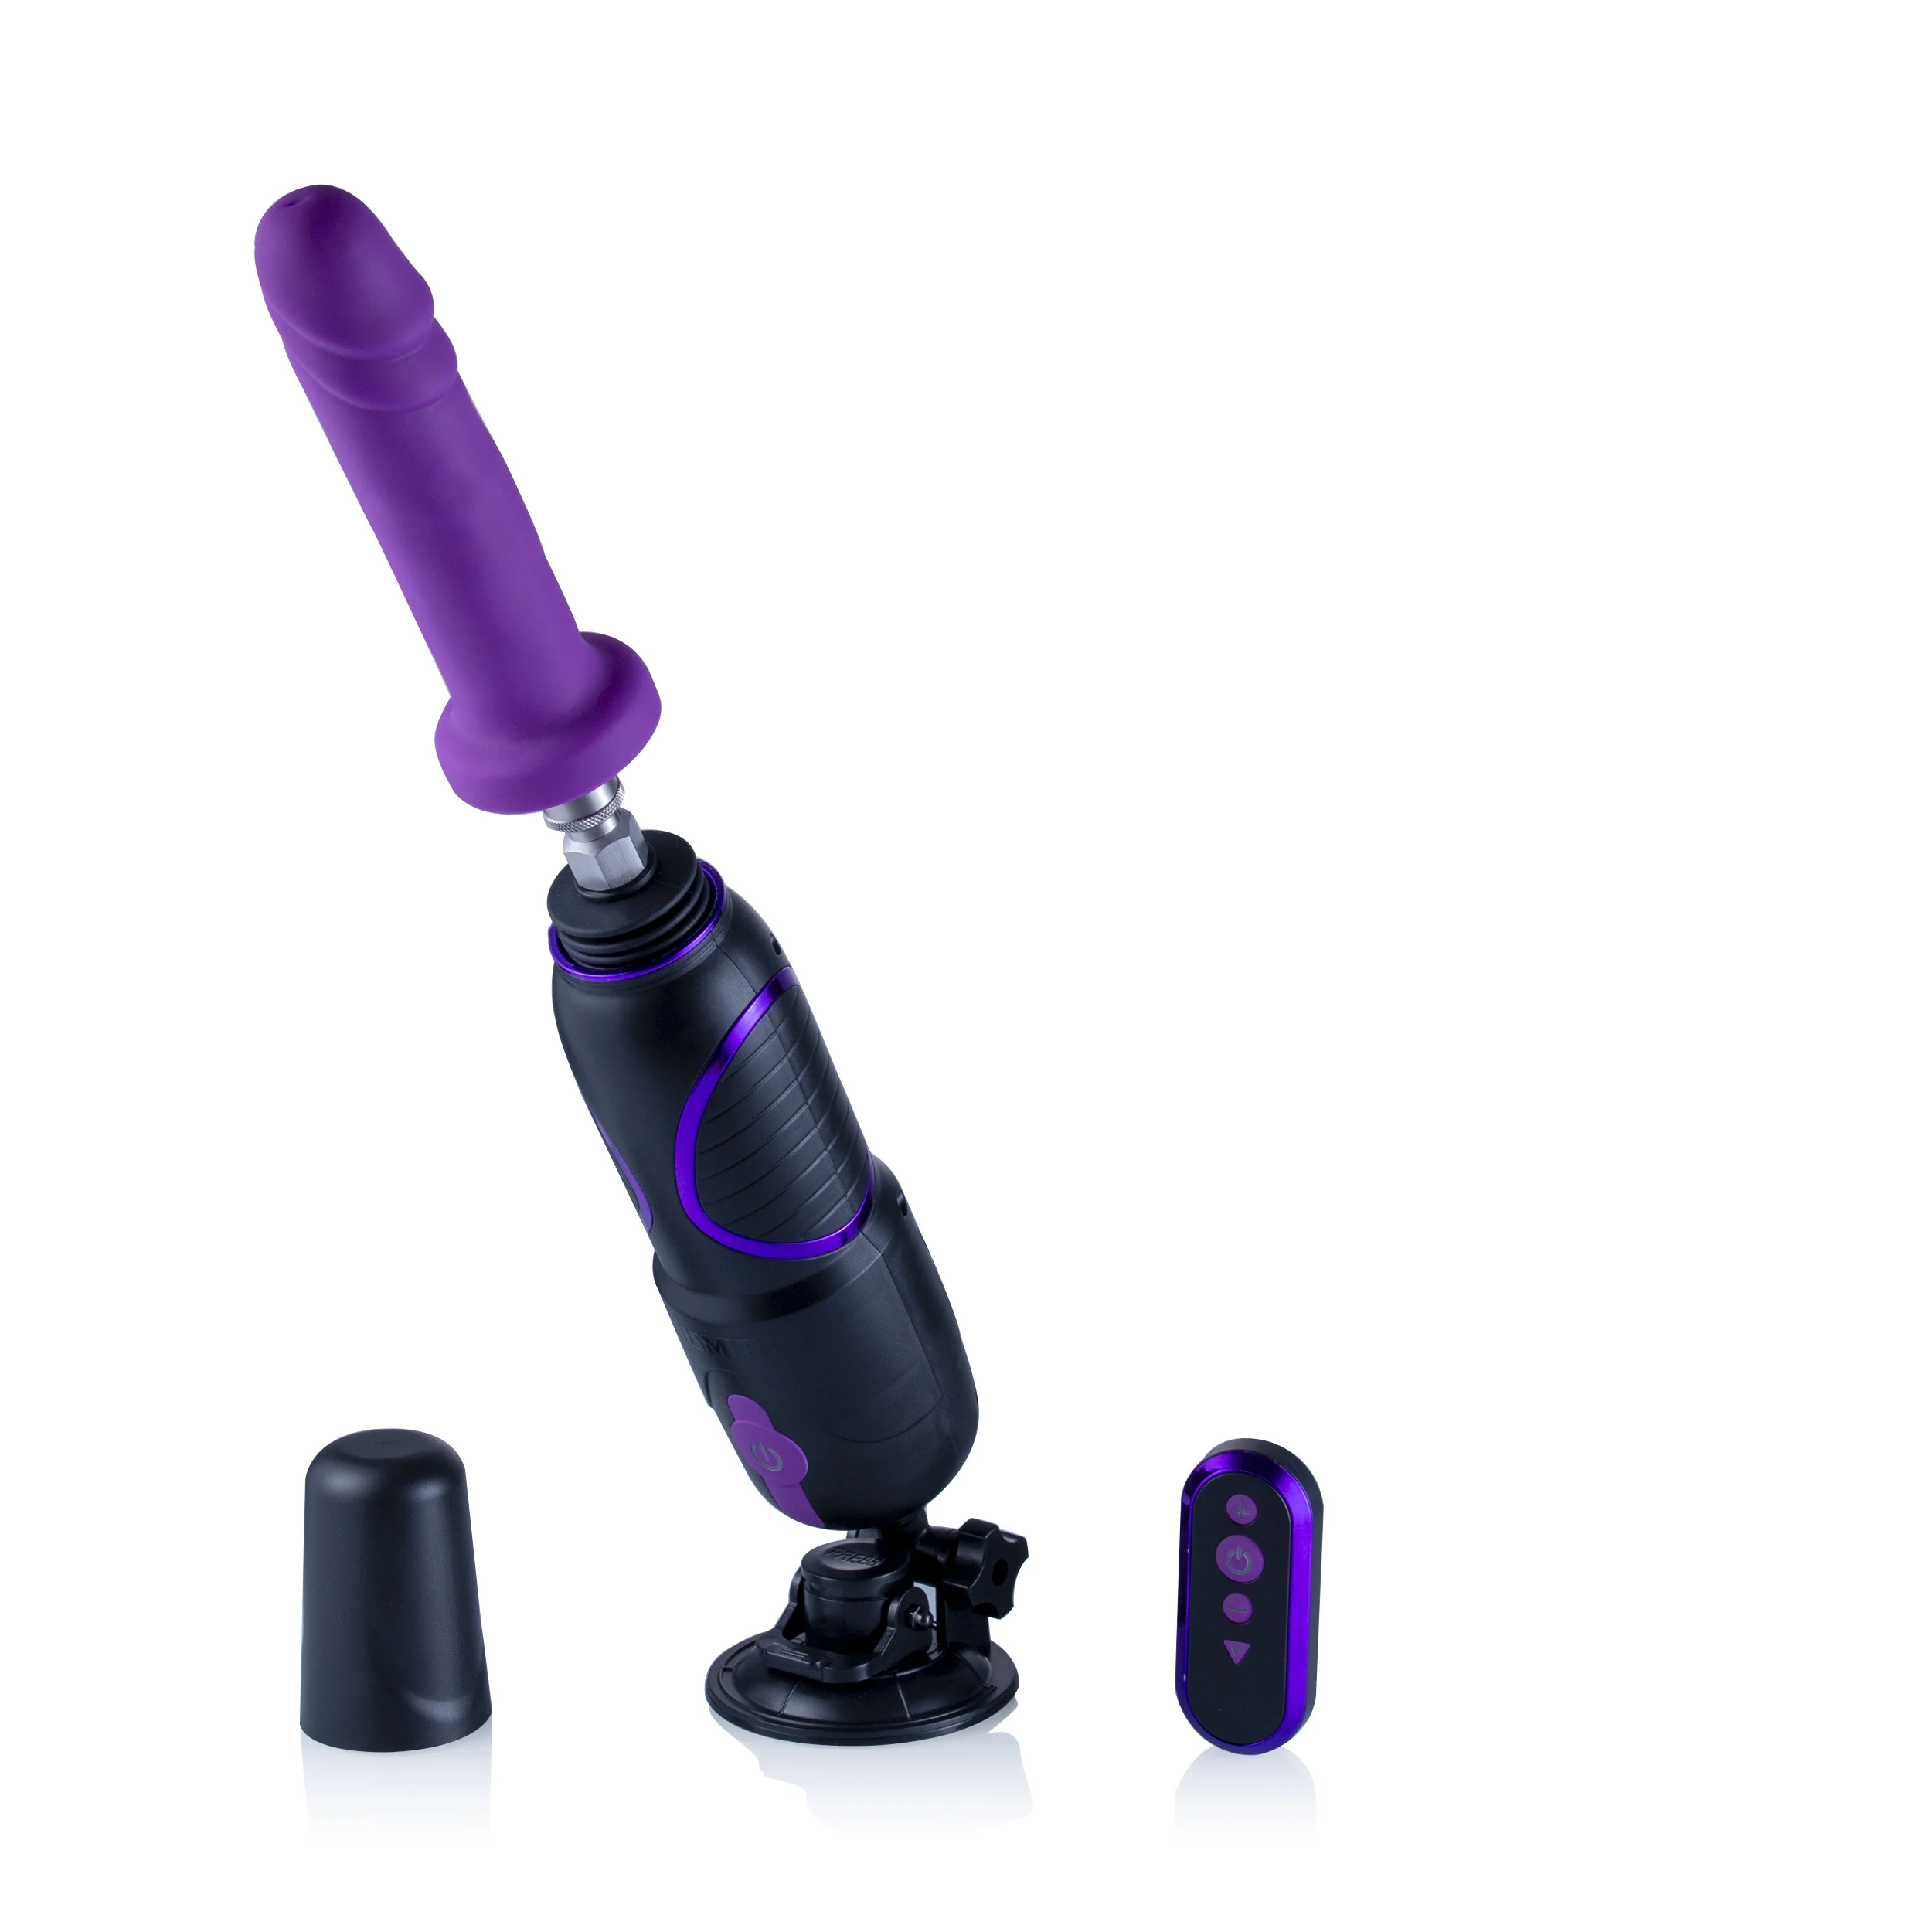 Hismith Pro Travelerportable Sex Machine App Controlled With Remote 